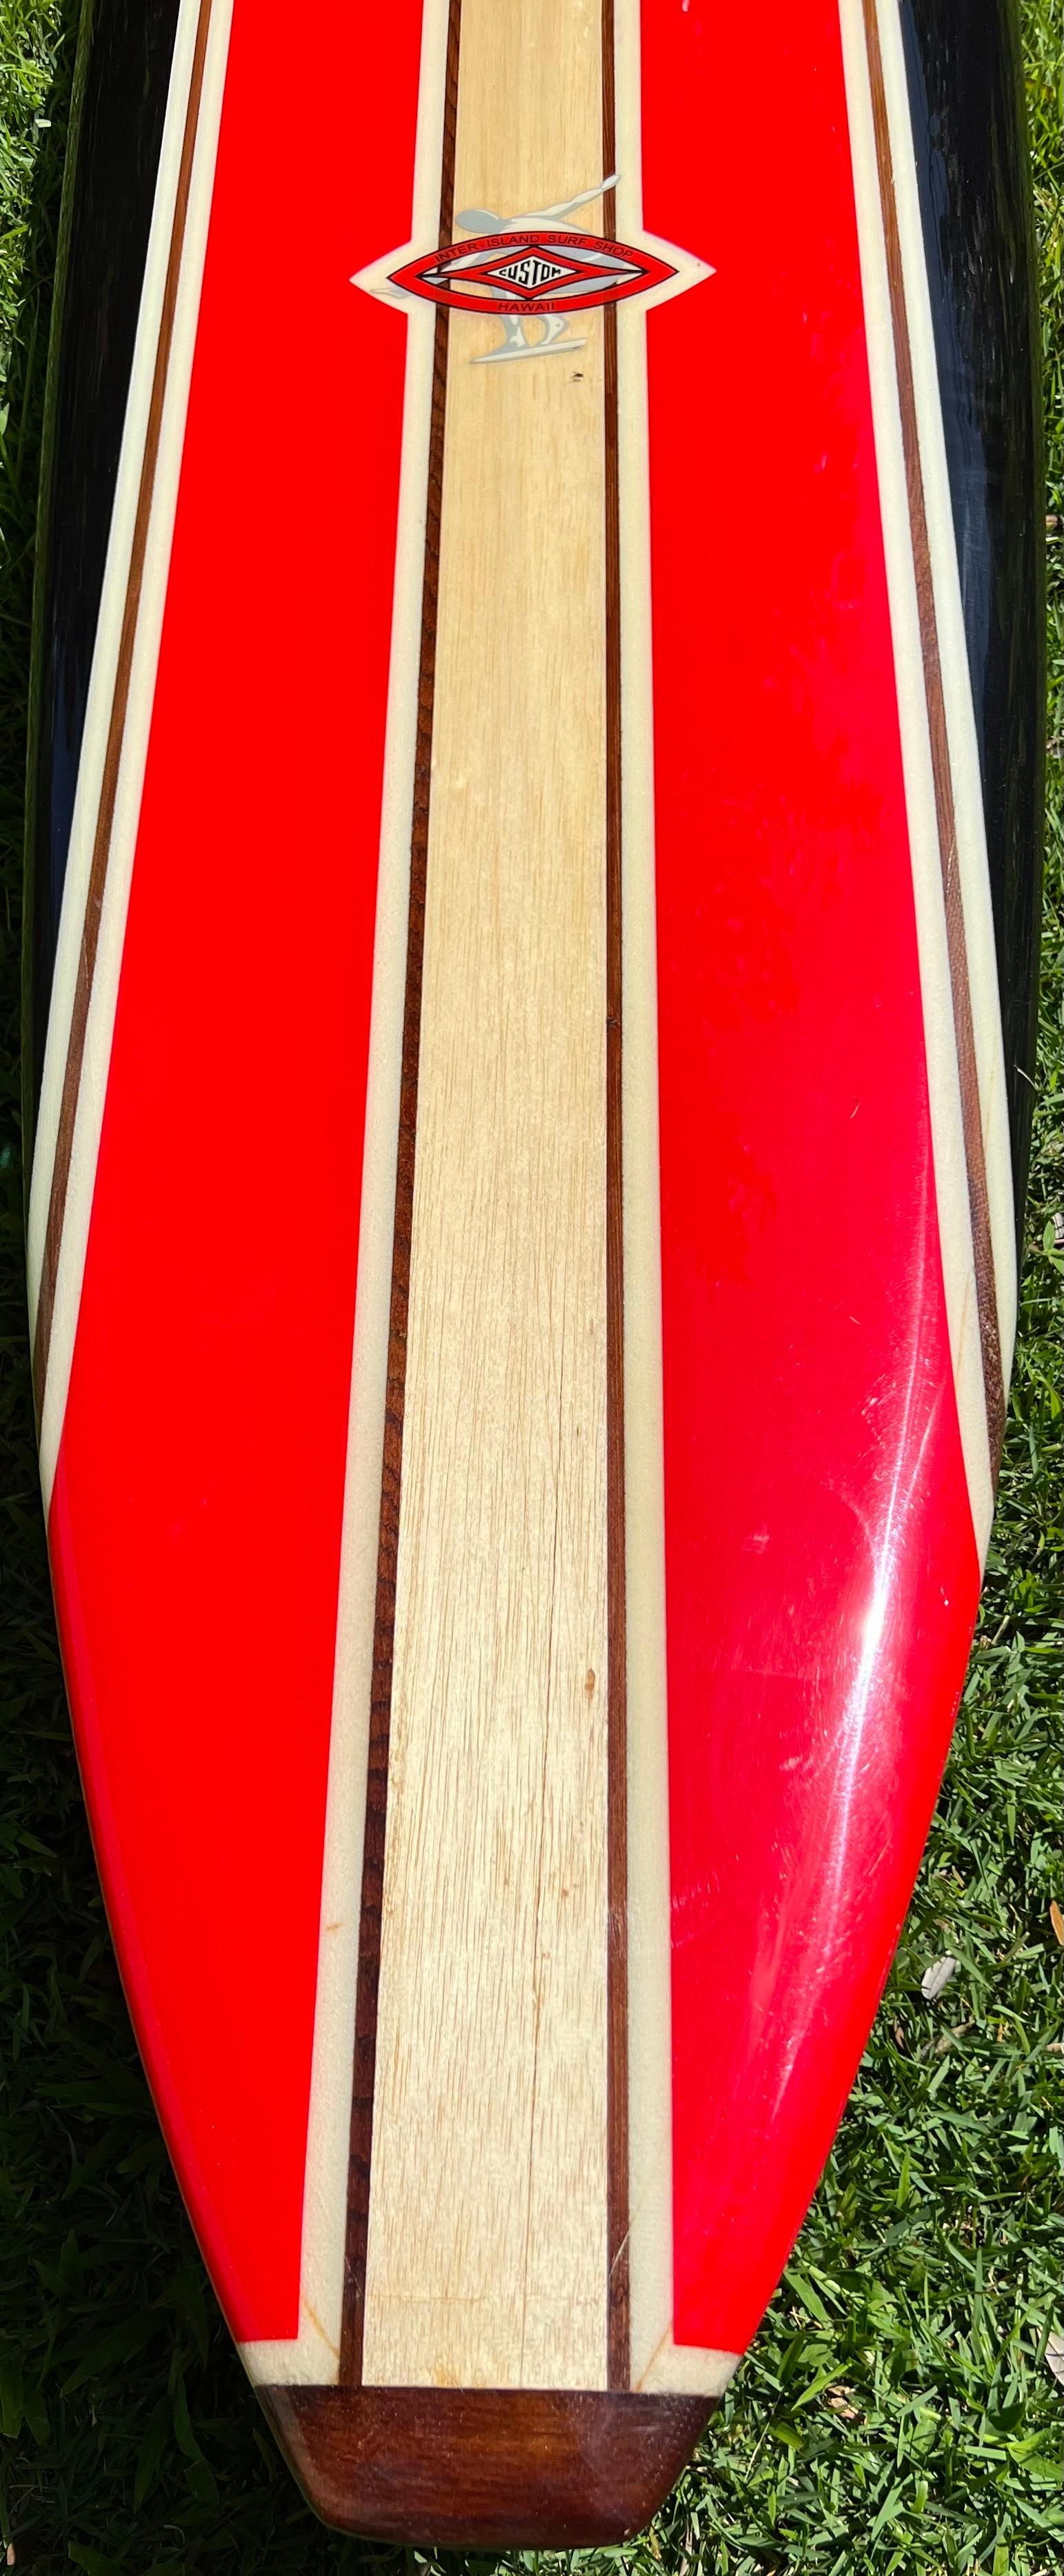 Fiberglass Vintage Mid-1960s Inter Island Big Wave Surfboard by Mike Diffenderfer For Sale